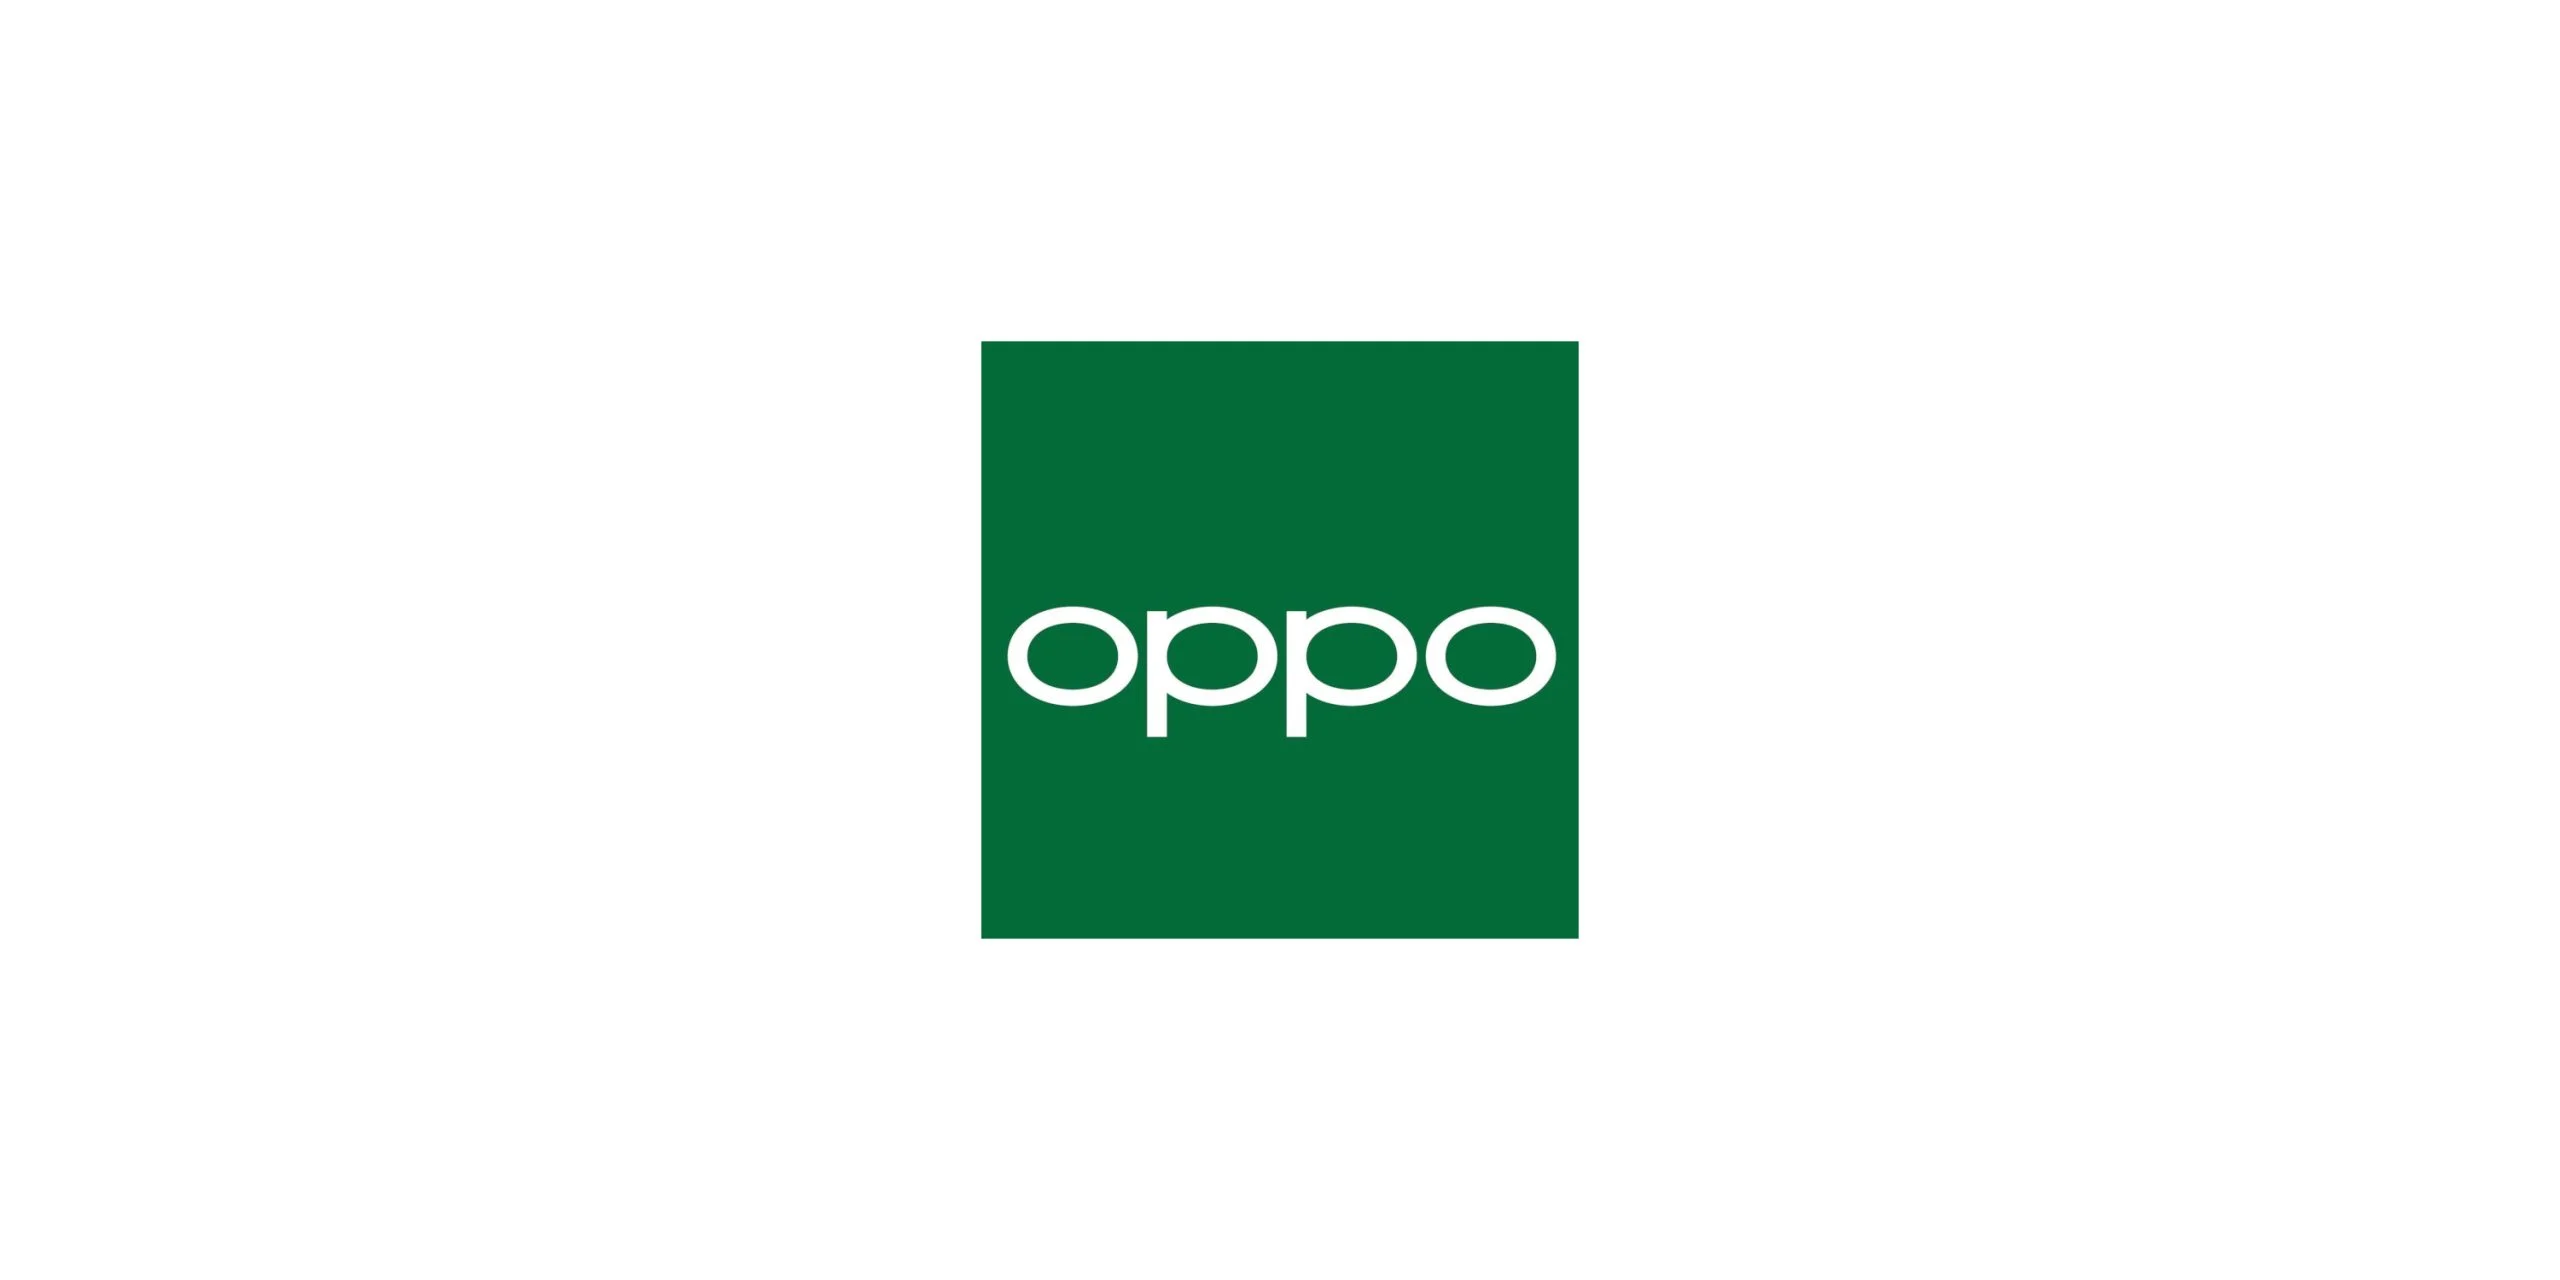 OPPO Germany - Toutes les informations